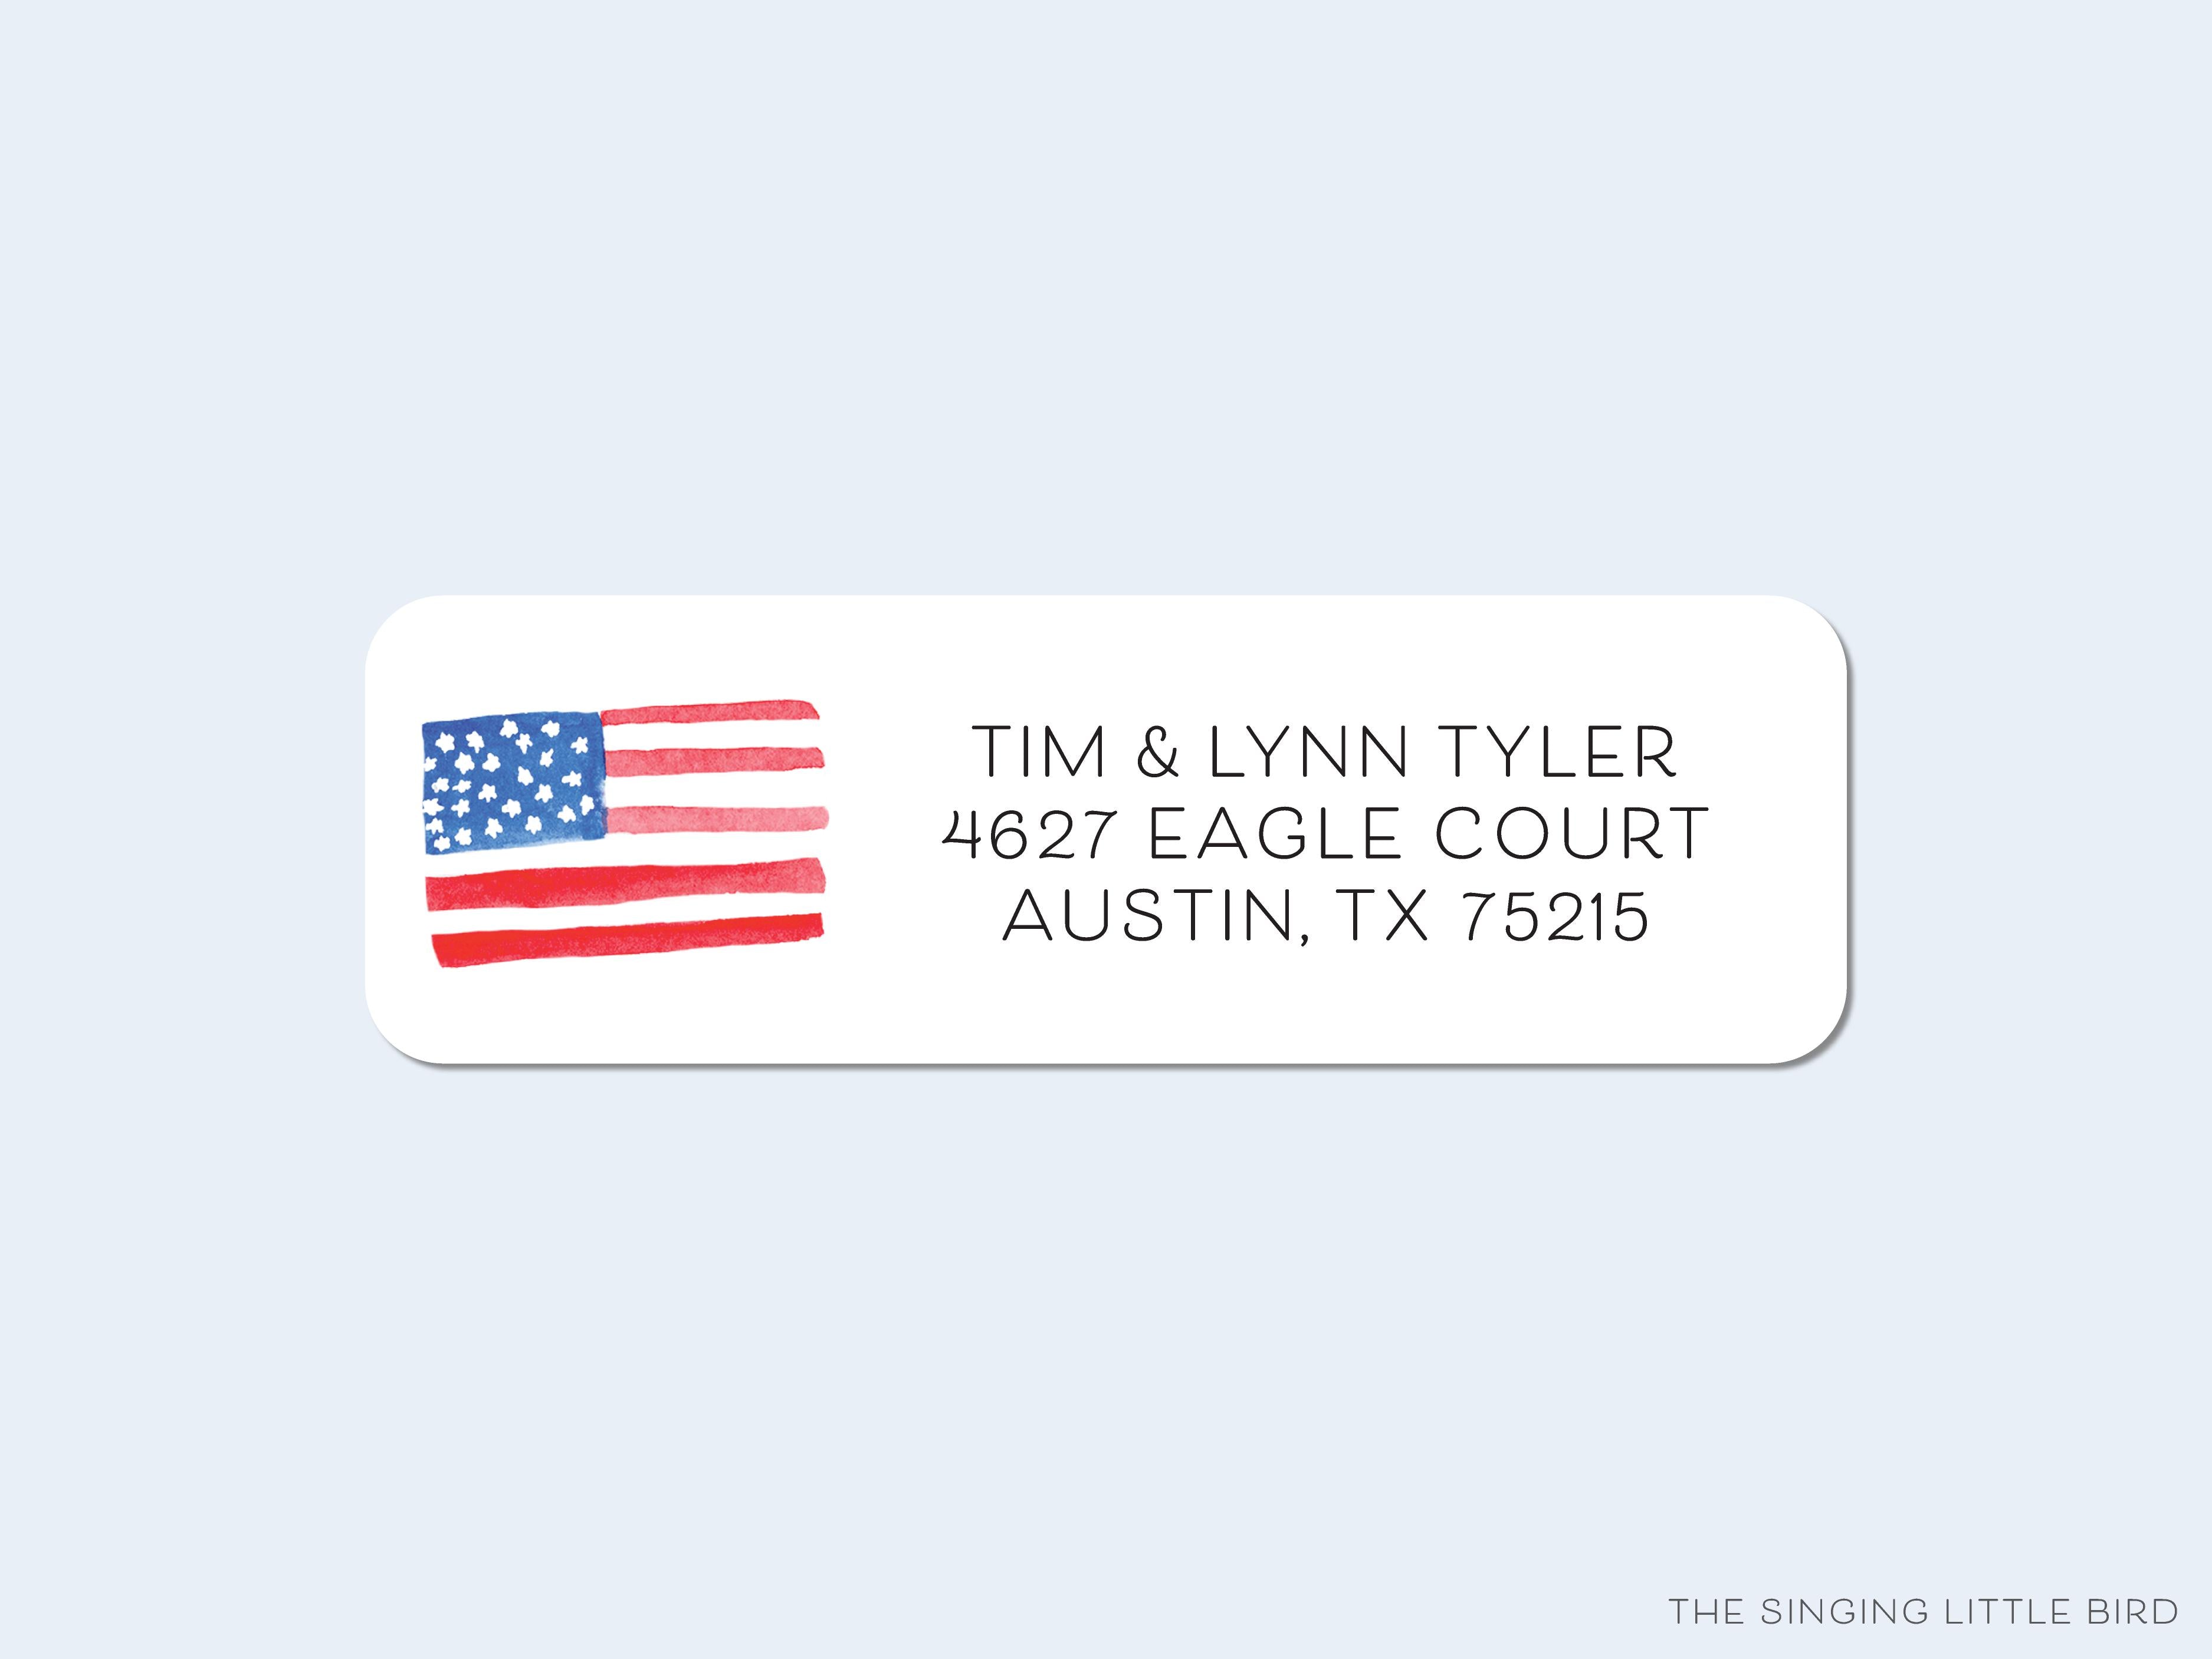 American Flag Return Address Labels- These personalized return address labels are 2.625" x 1" and feature our hand-painted watercolor American flag, printed in the USA on beautiful matte finish labels. These make great gifts for yourself or the patriotic lover. -The Singing Little Bird